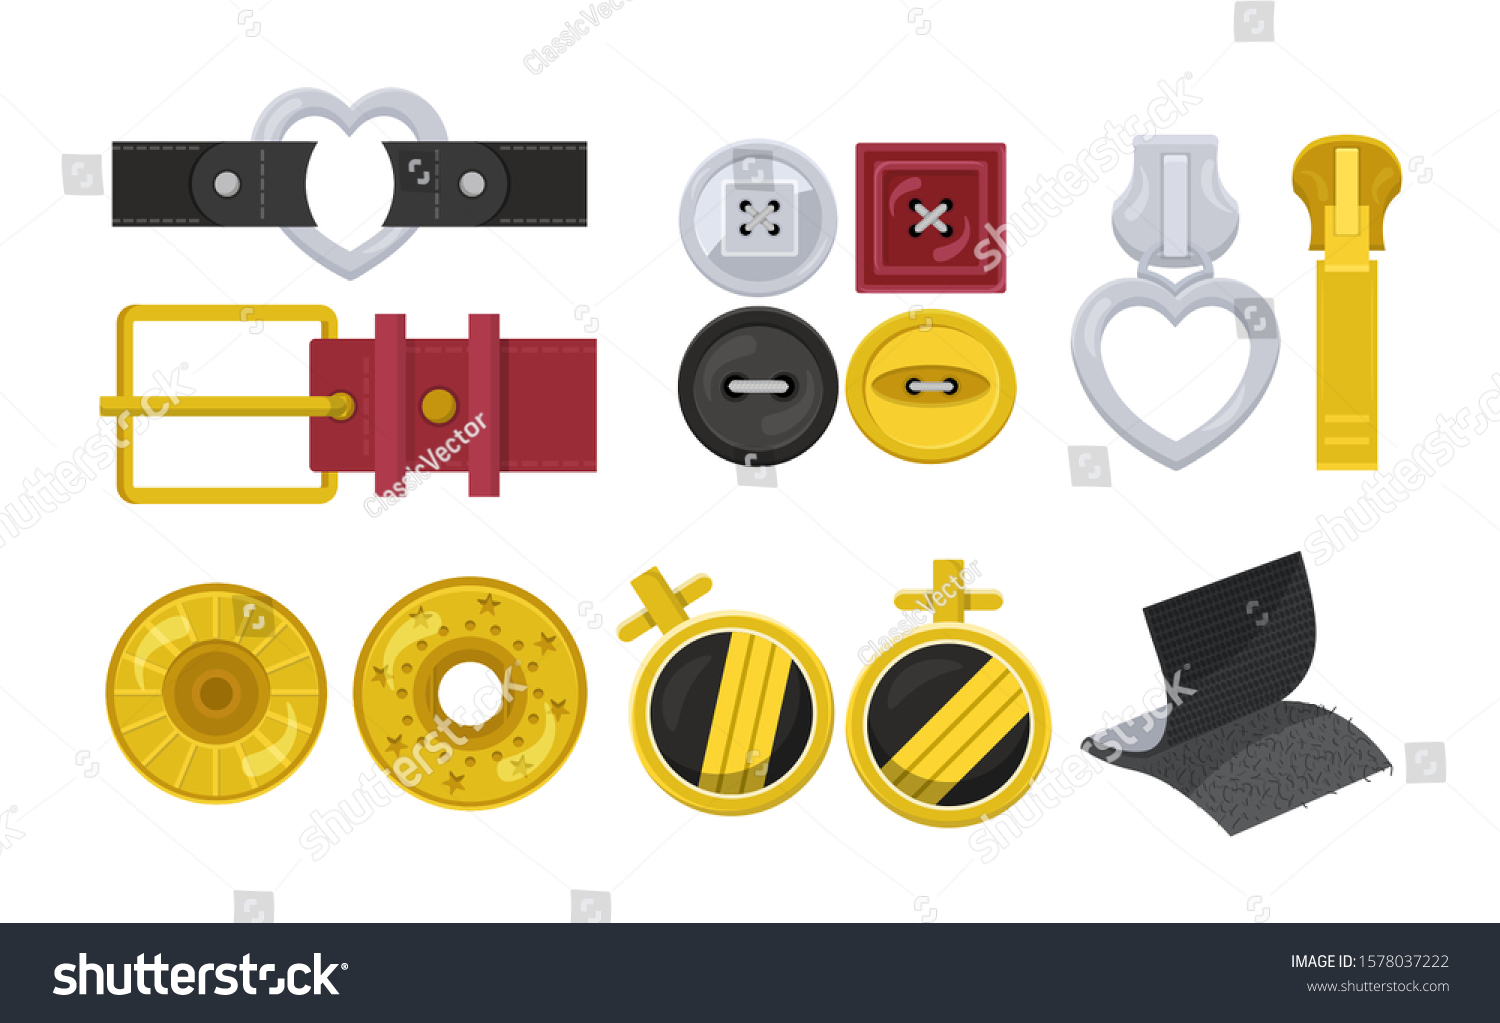 SVG of Clasps design elements flat set isolated on white. Carabiner, hook or snap for bag, belt. Buckle leather, tabs, straps. Cufflinks, buttons different shapes and materials. Vector cartoon illustration svg